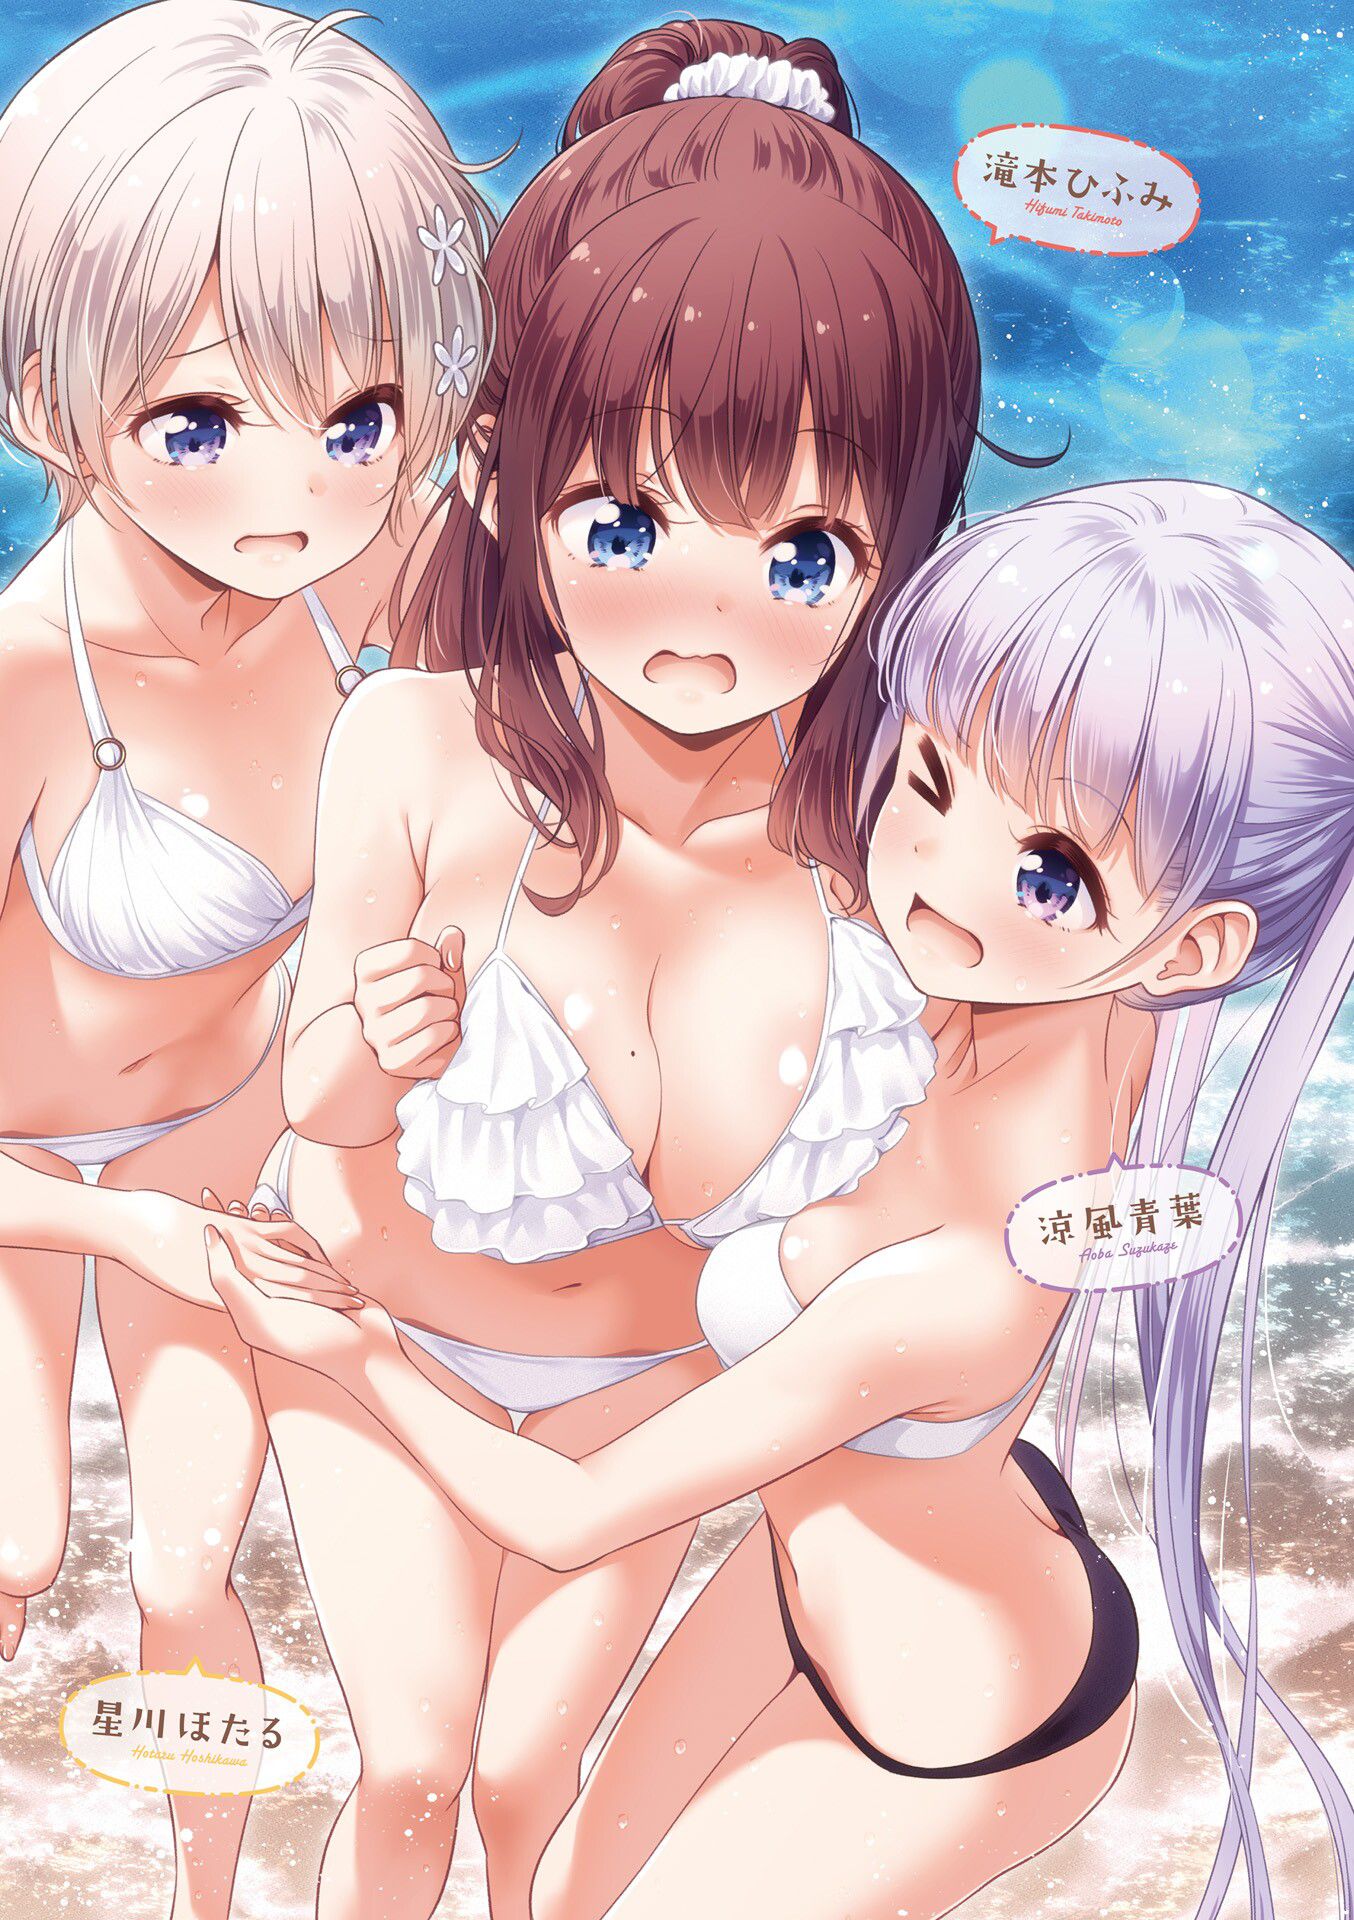 [With image] New GAME's most naughty character, determined www www 1